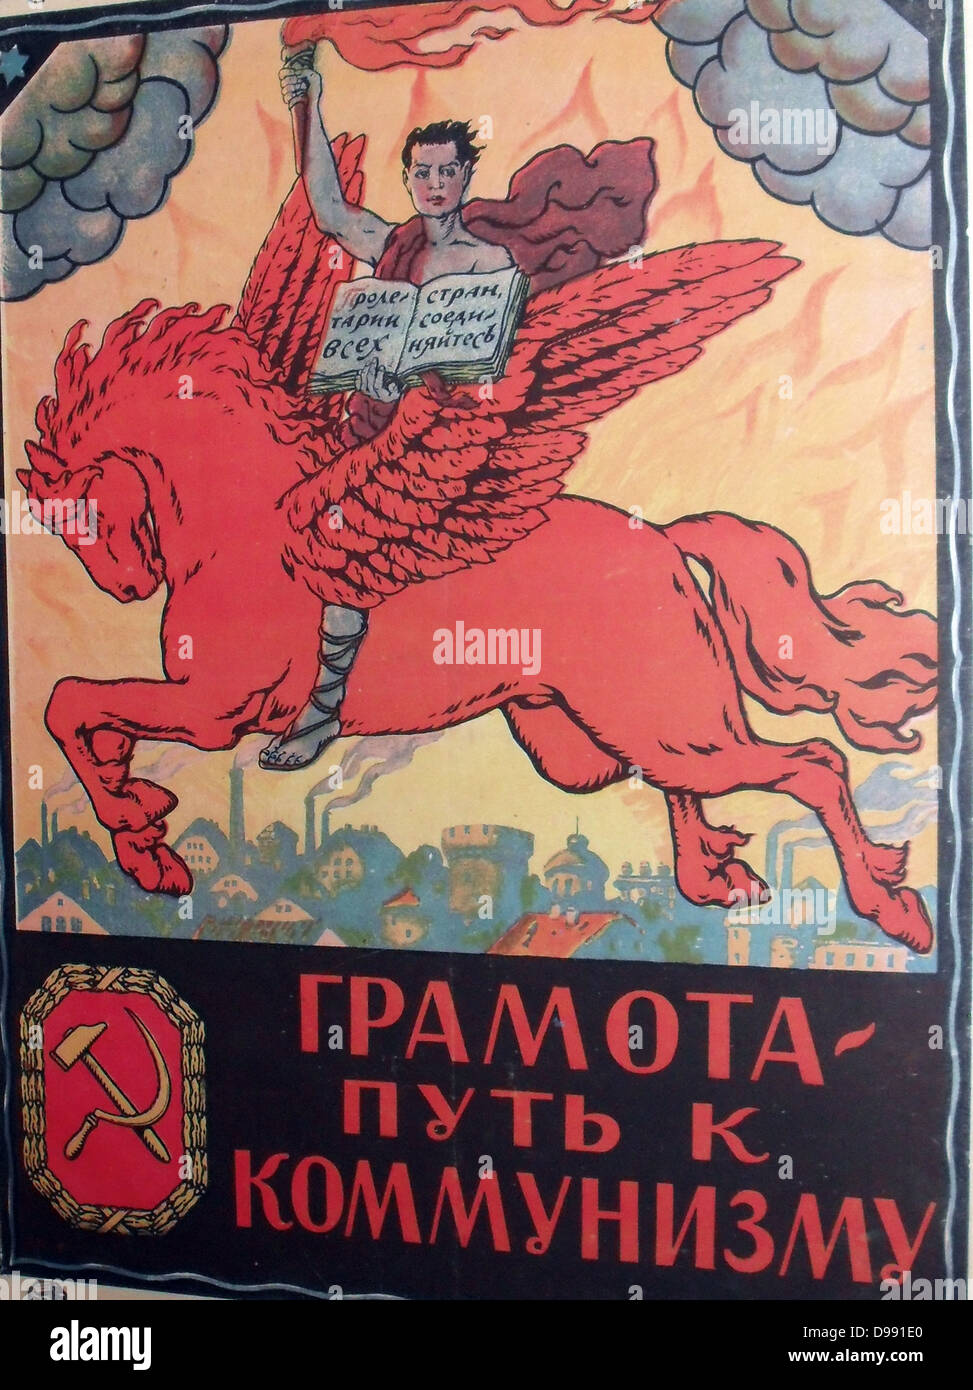 Political Poster from Russia 1920. 'Literacy is the path to Communism'. part of a national literacy campaign in the early years of the Soviet Union. Stock Photo